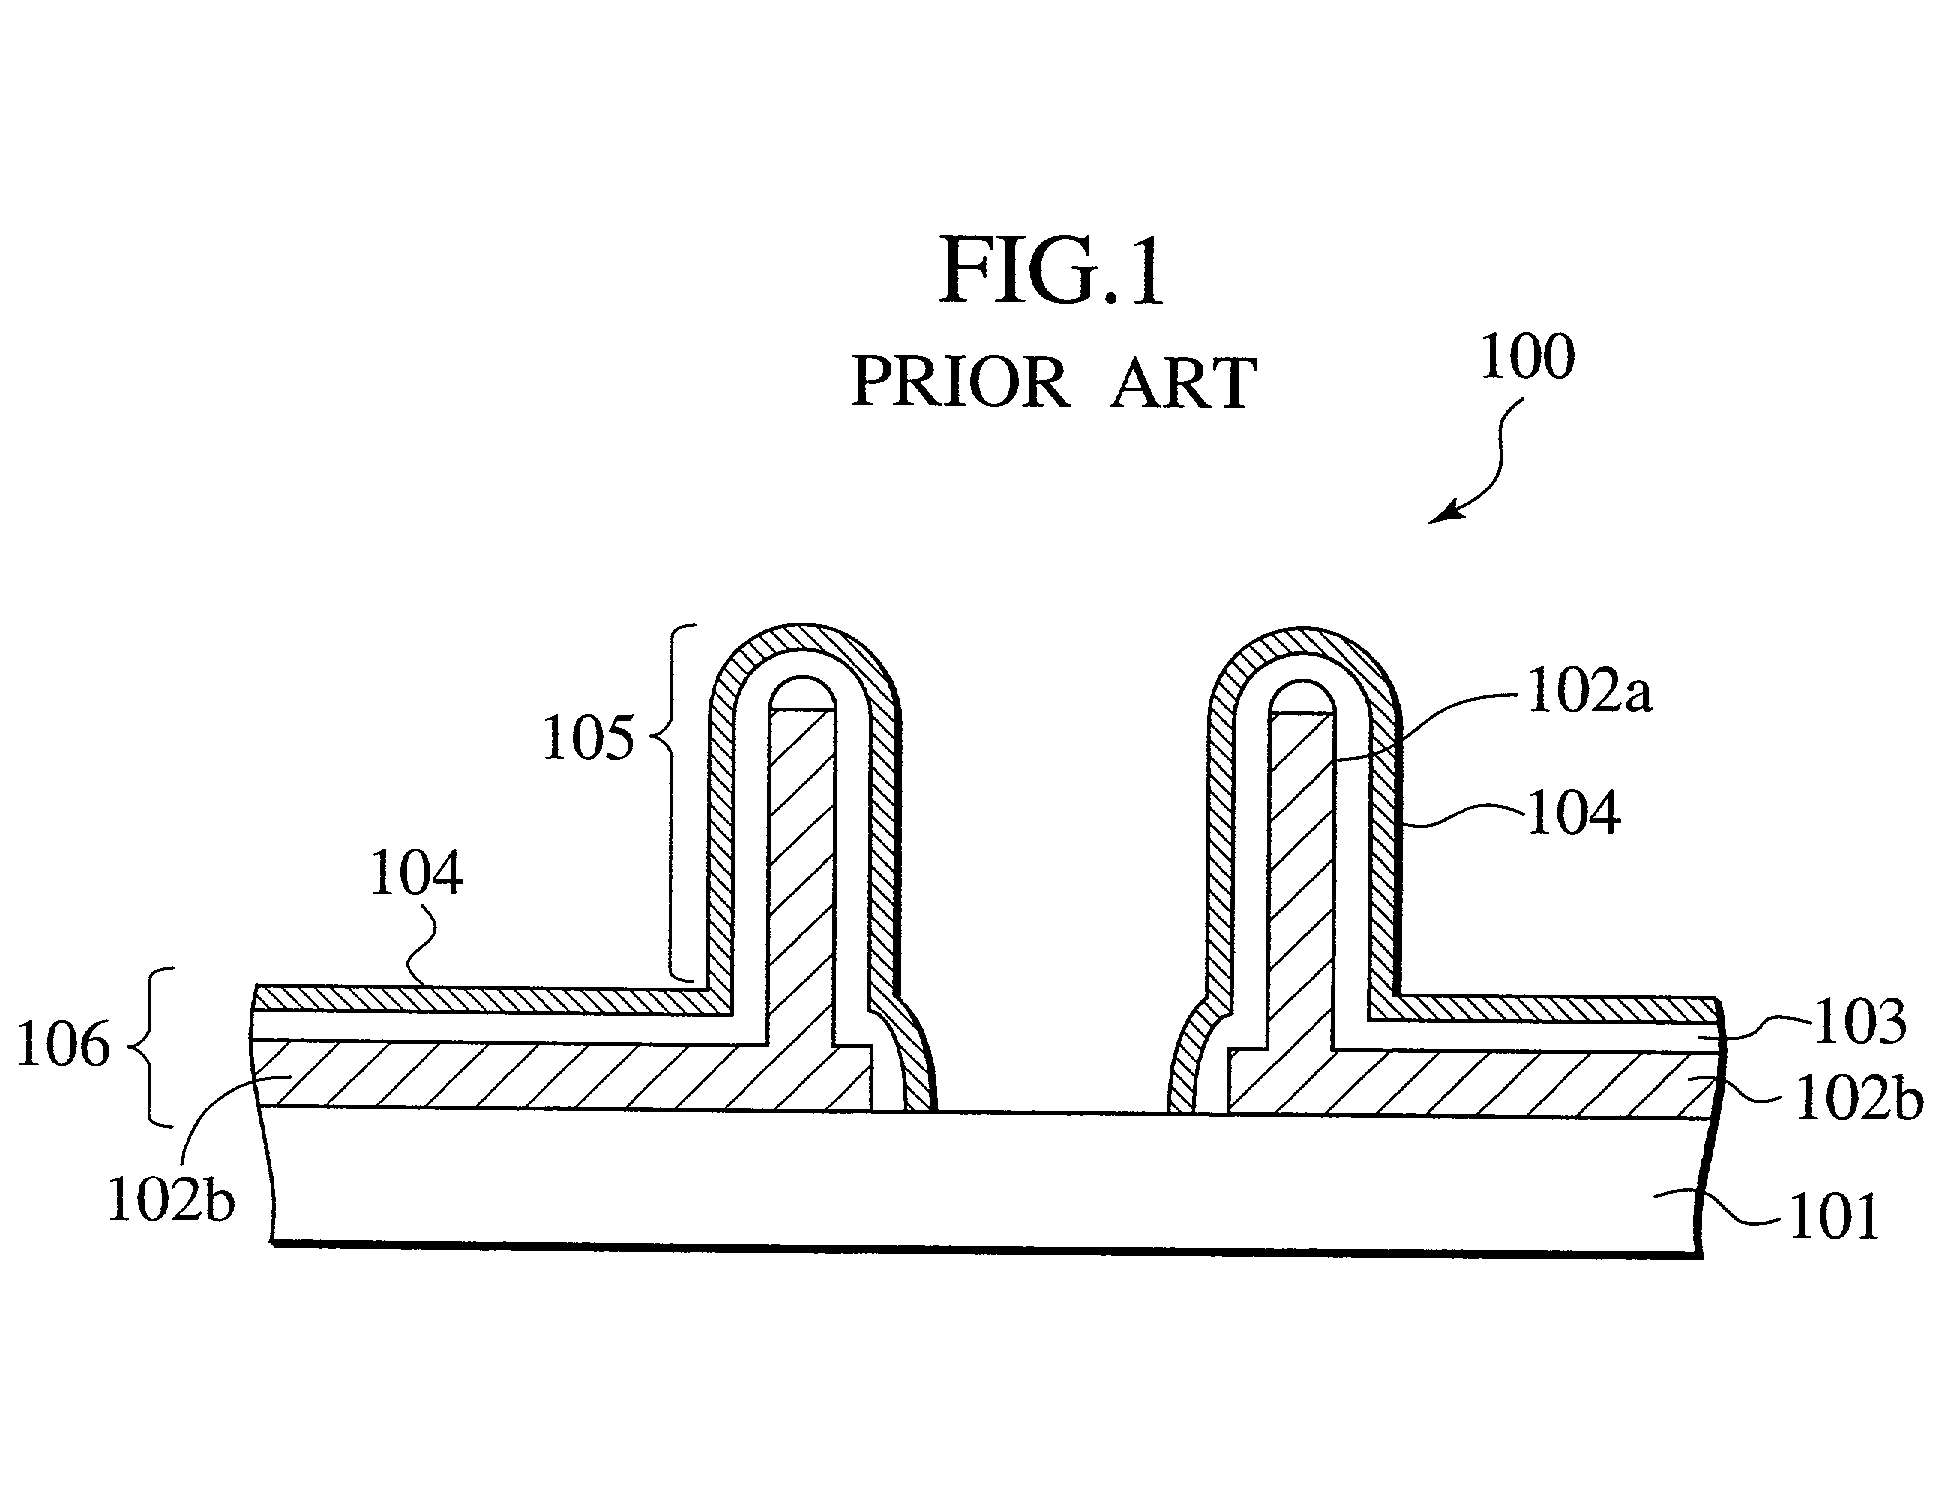 Probe pin for testing electrical characteristics of apparatus, probe card using probe pins